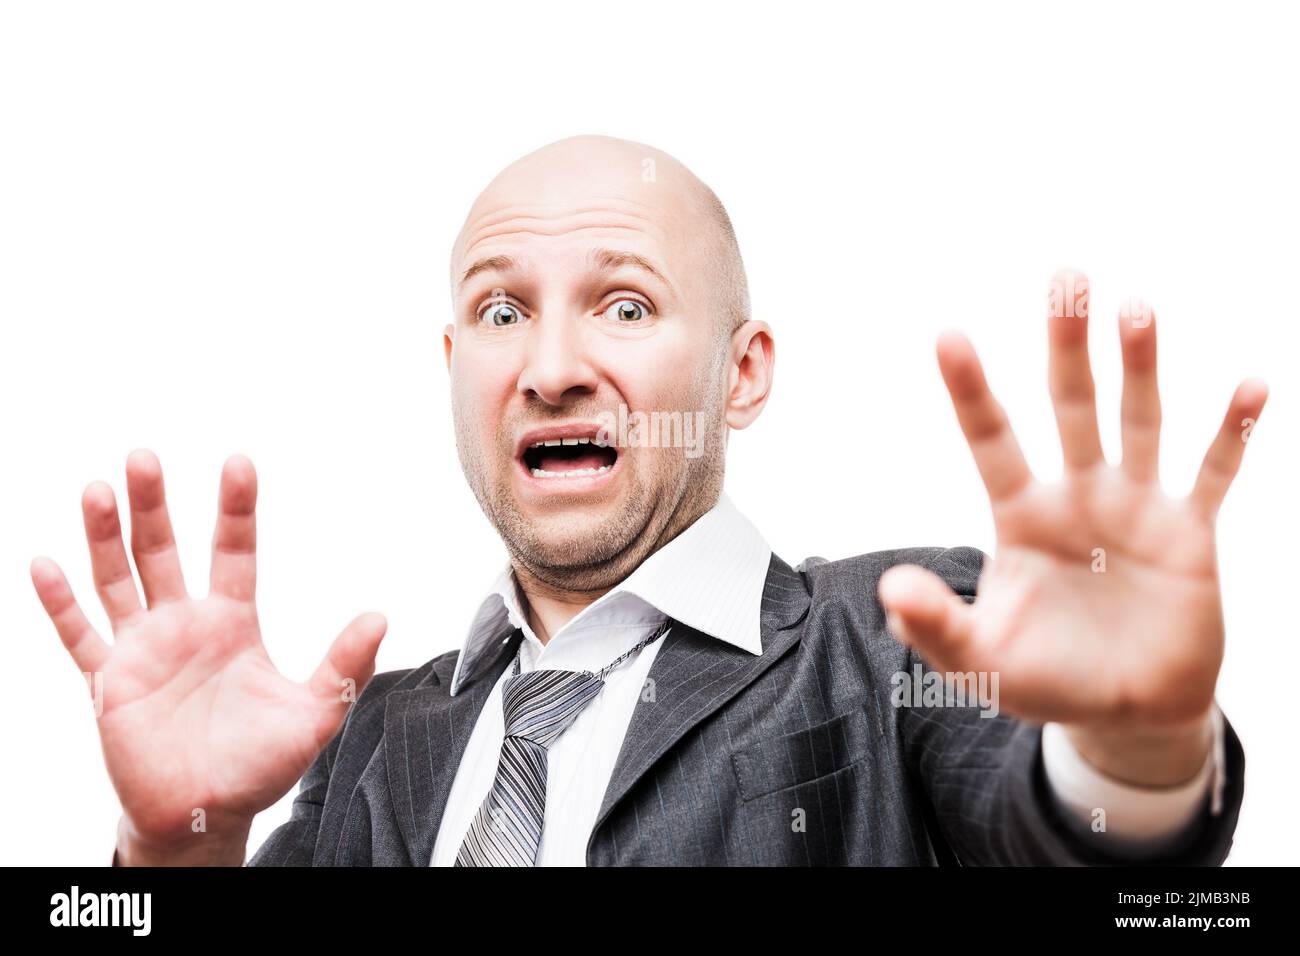 Scared or terrified businessman hand gesturing hide face stop sign Stock Photo